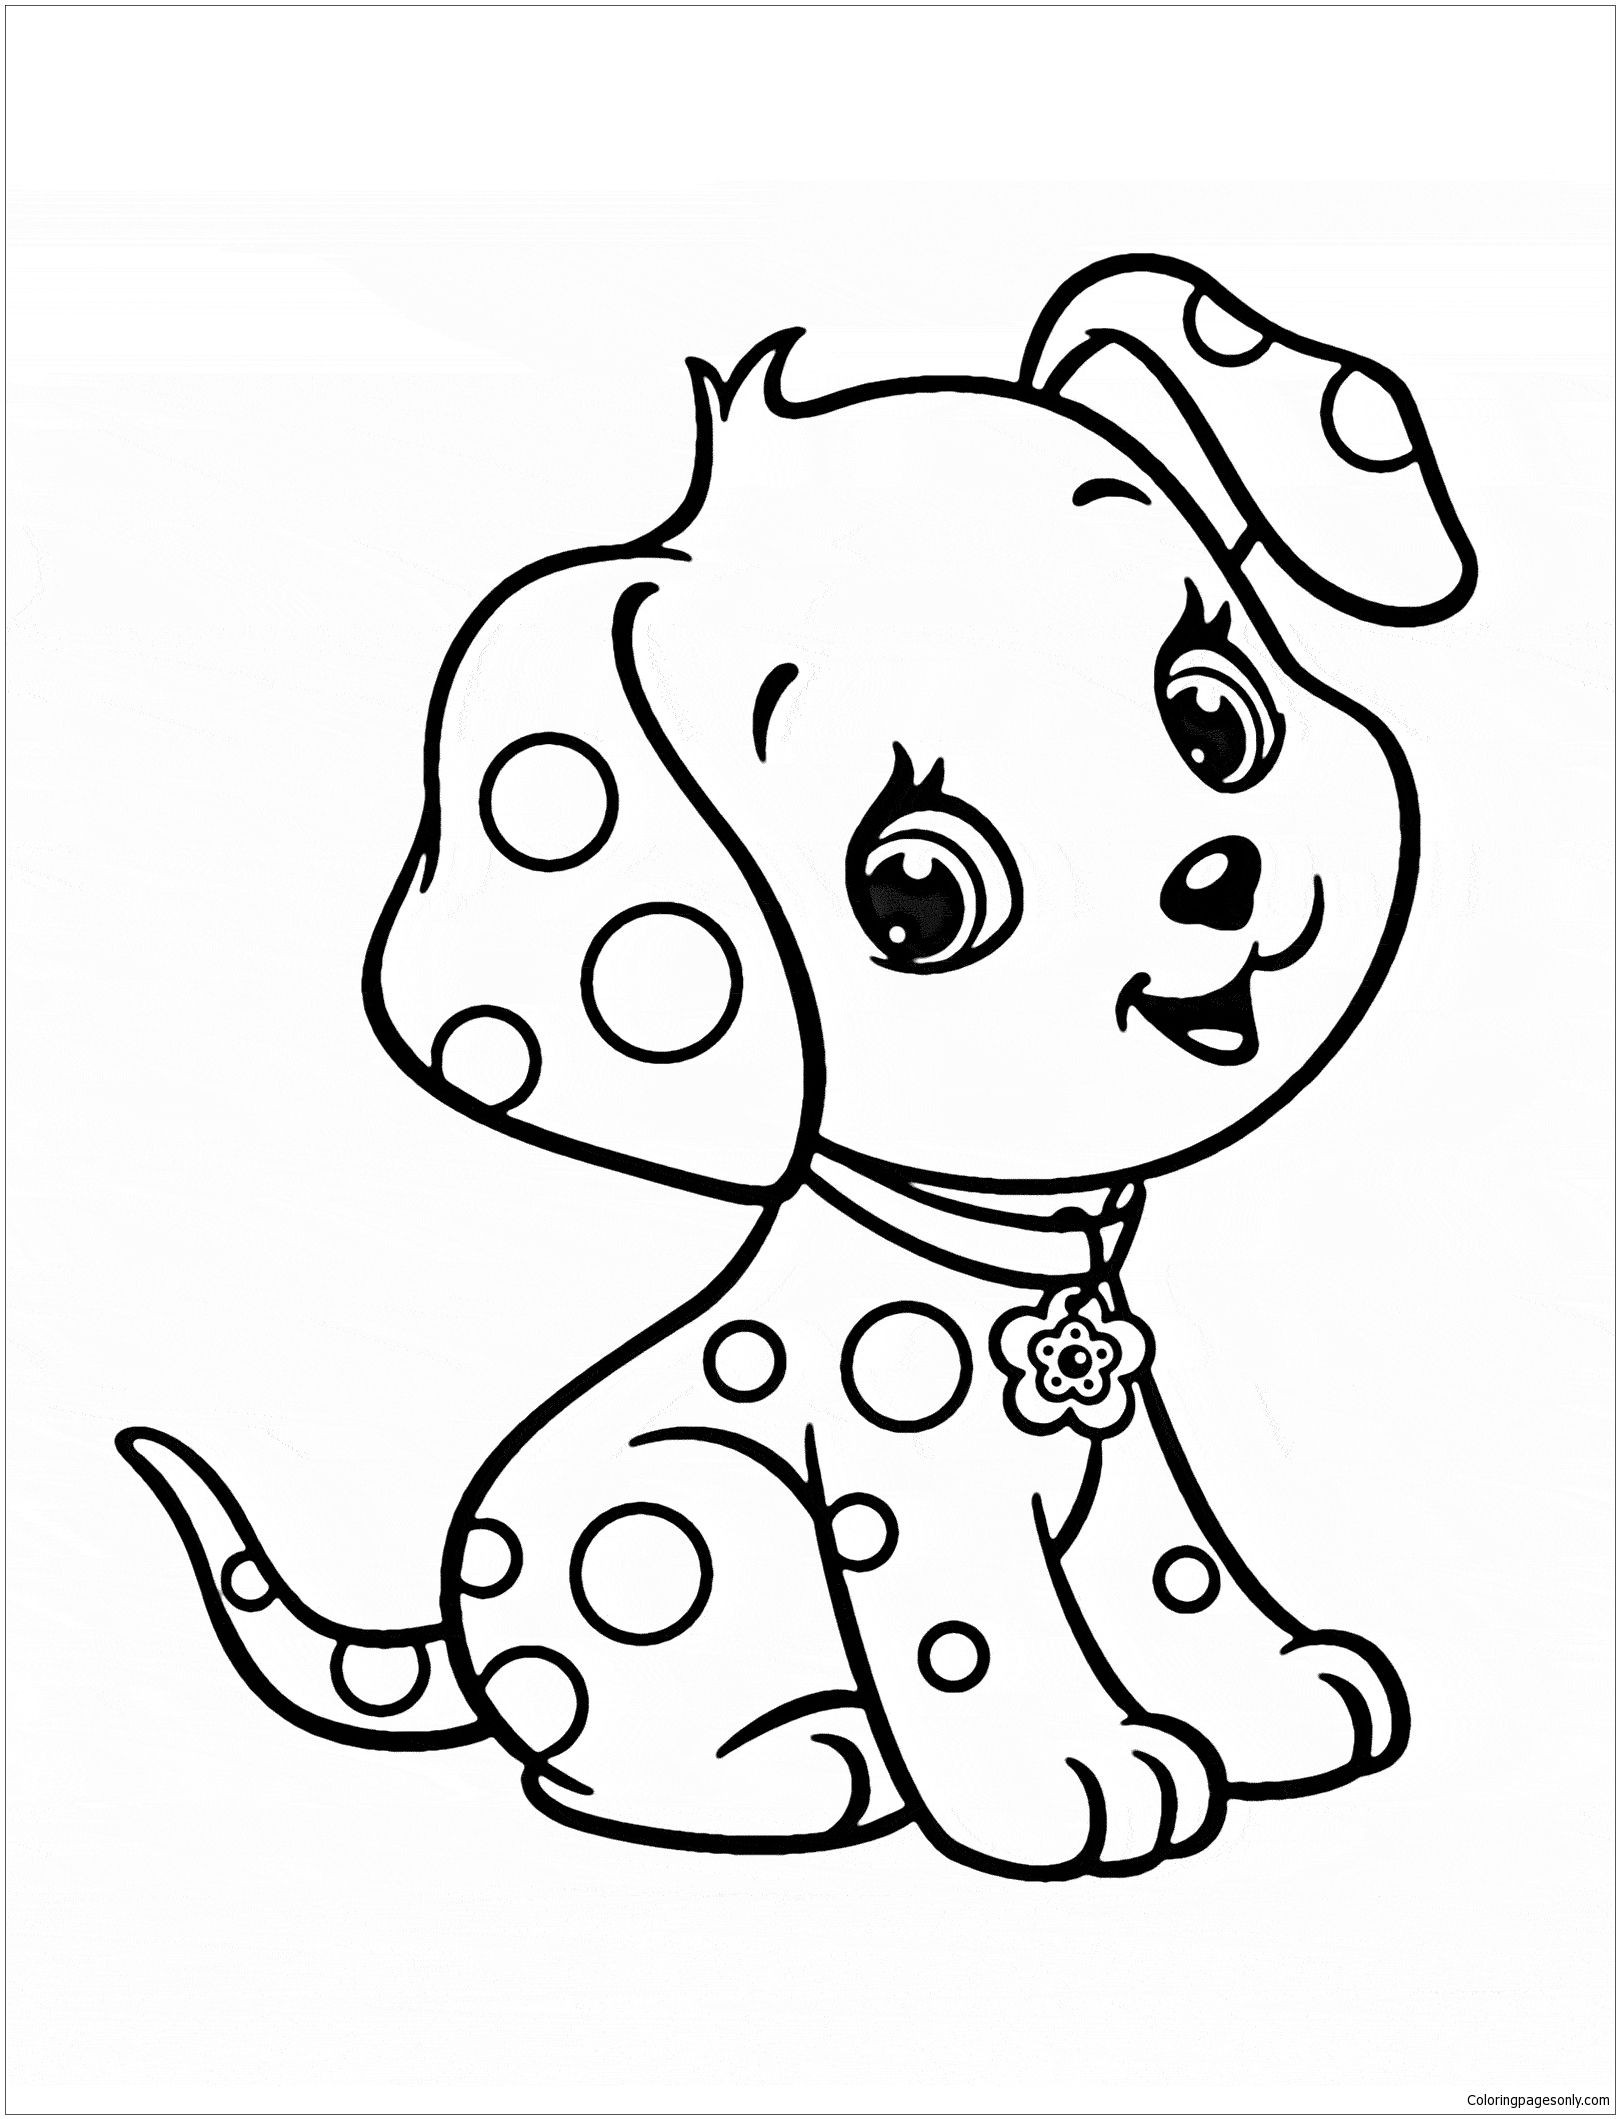 Animal Coloring Pages For Girls
 Cute Puppy 5 Coloring Page